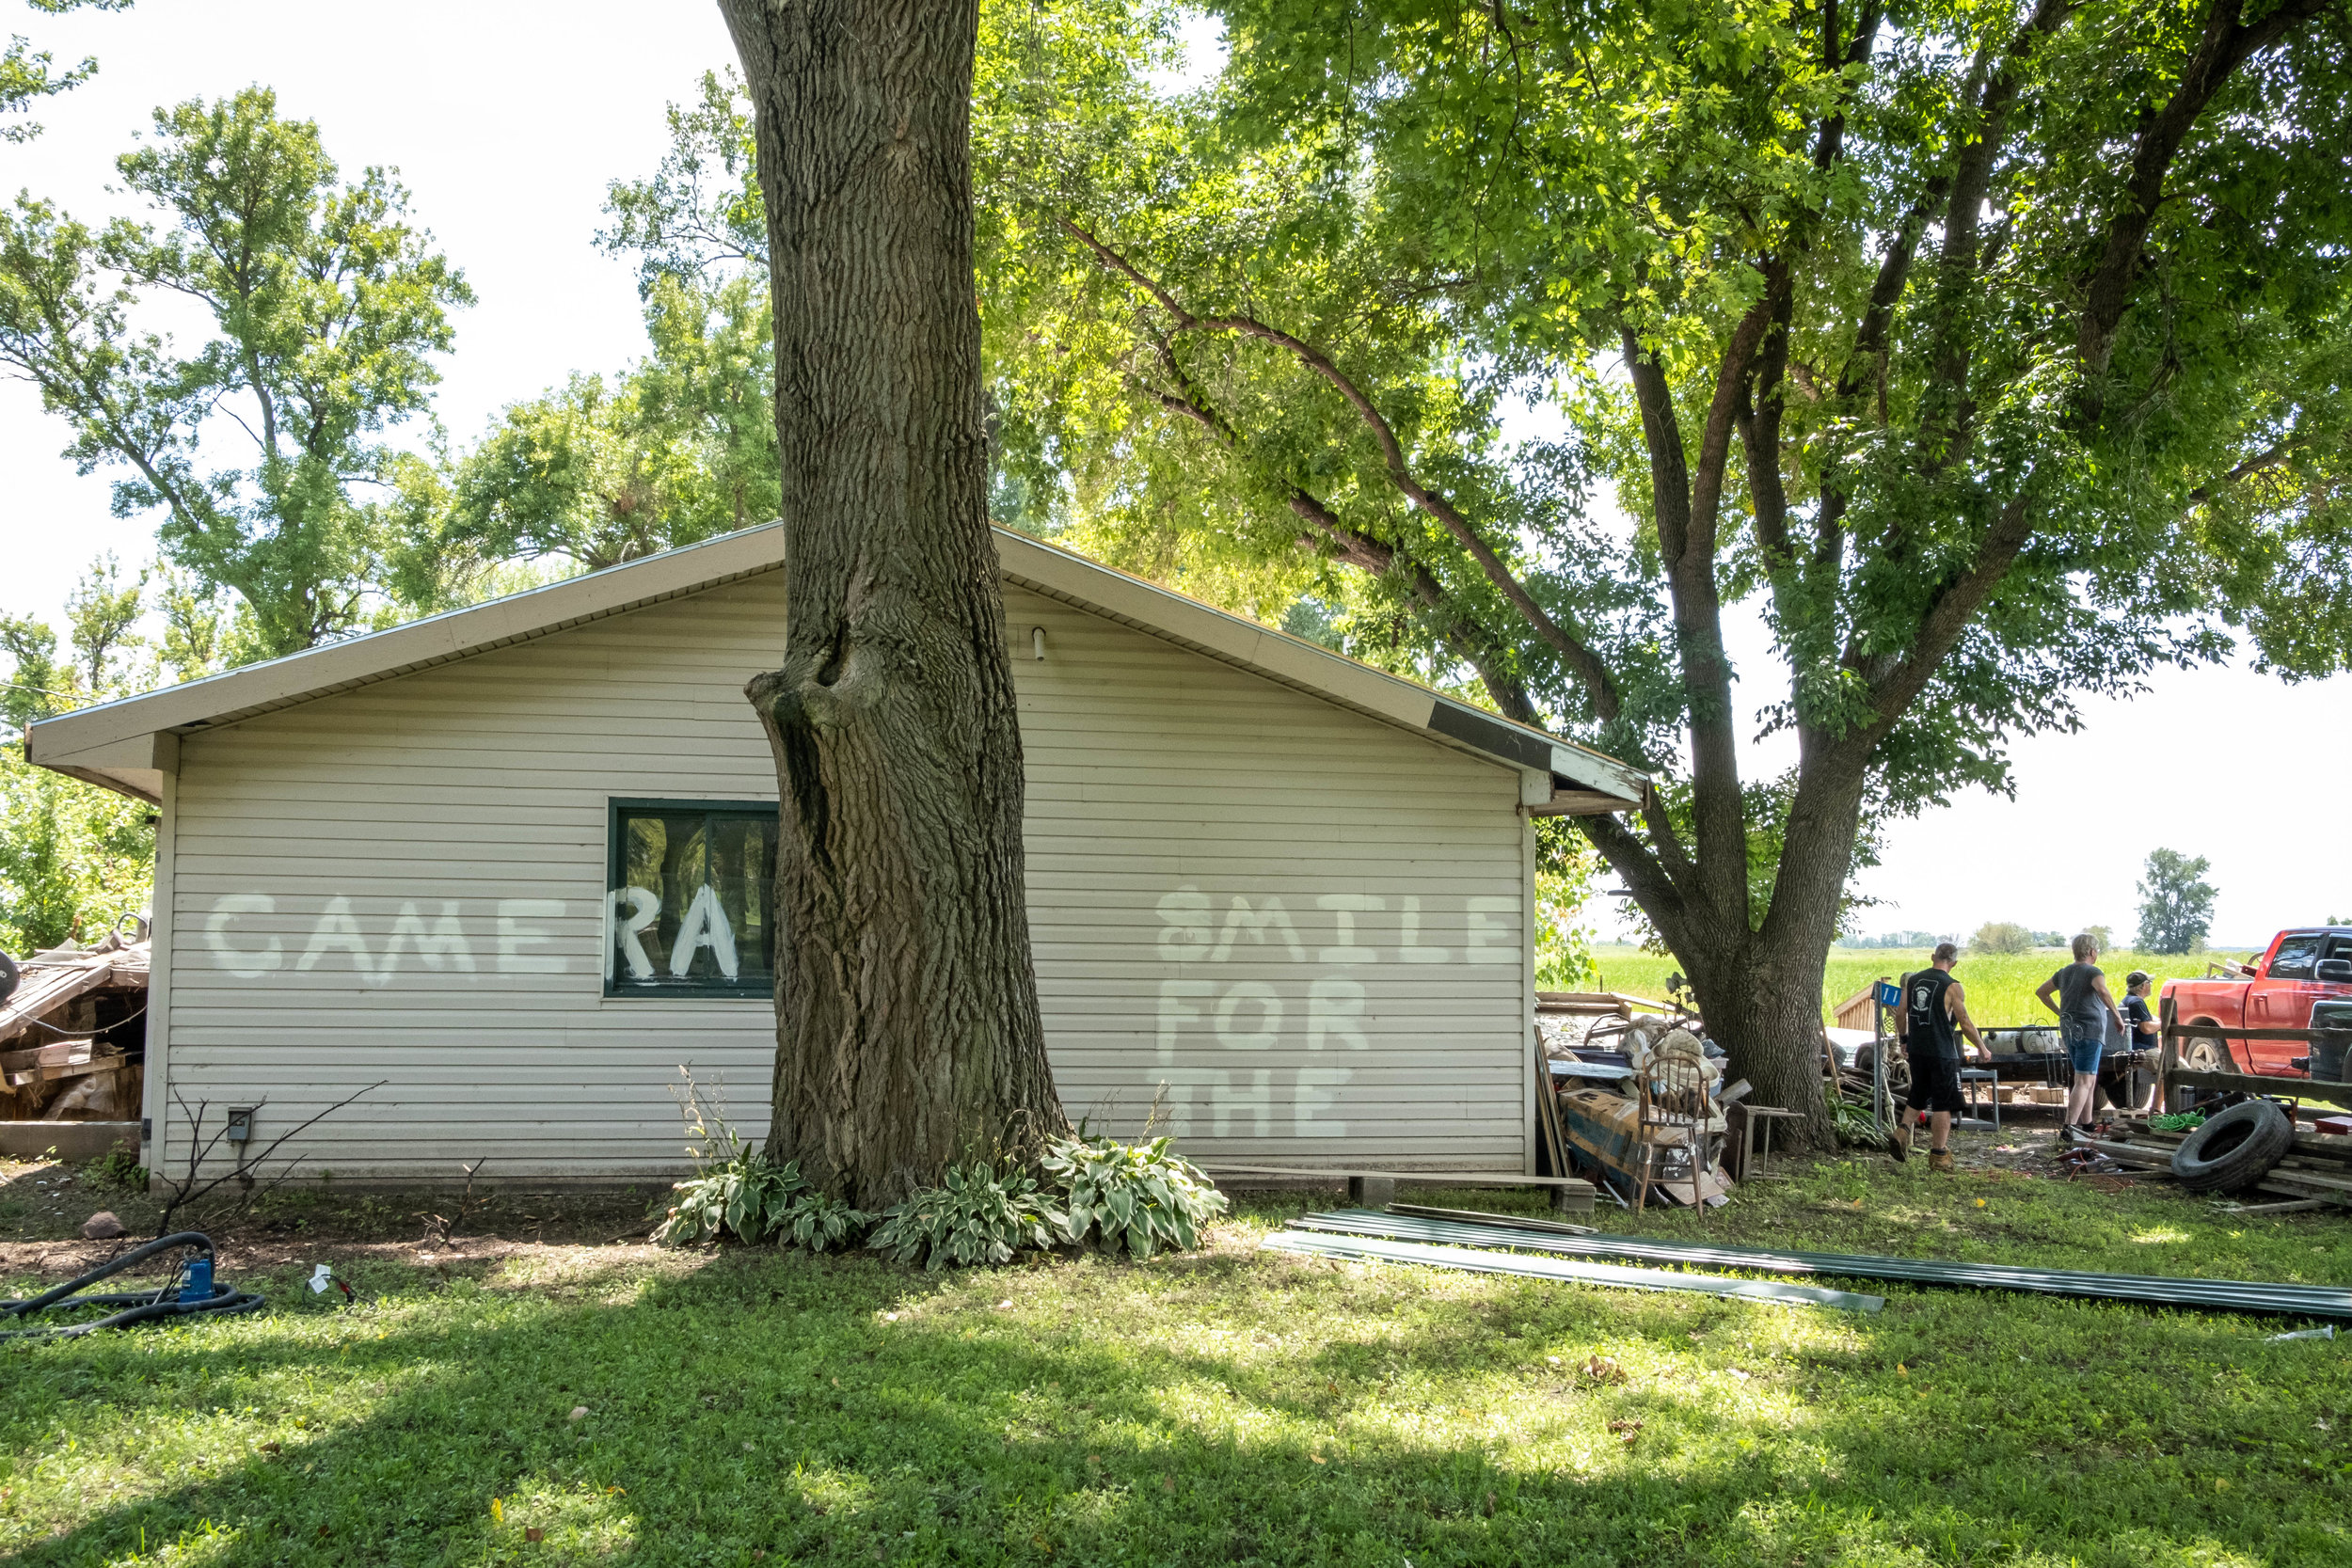  Dean Doty spray painted this message after his homestead was robbed by looters. 